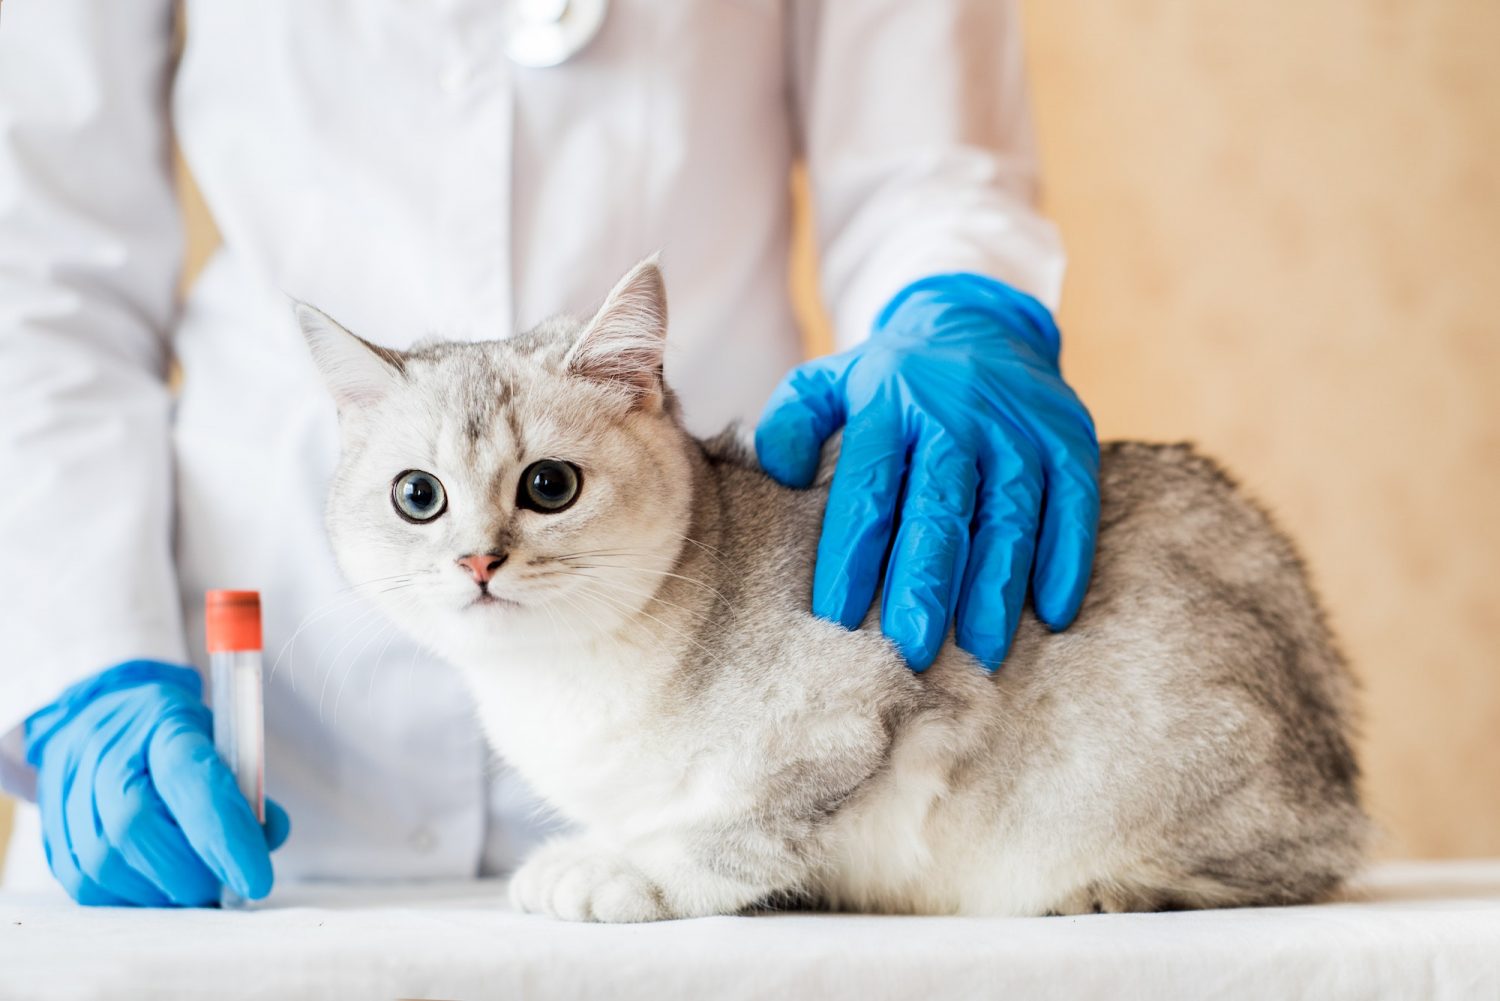 domestic pet cat for examination in a vet clinic, hands of a veterinarian.